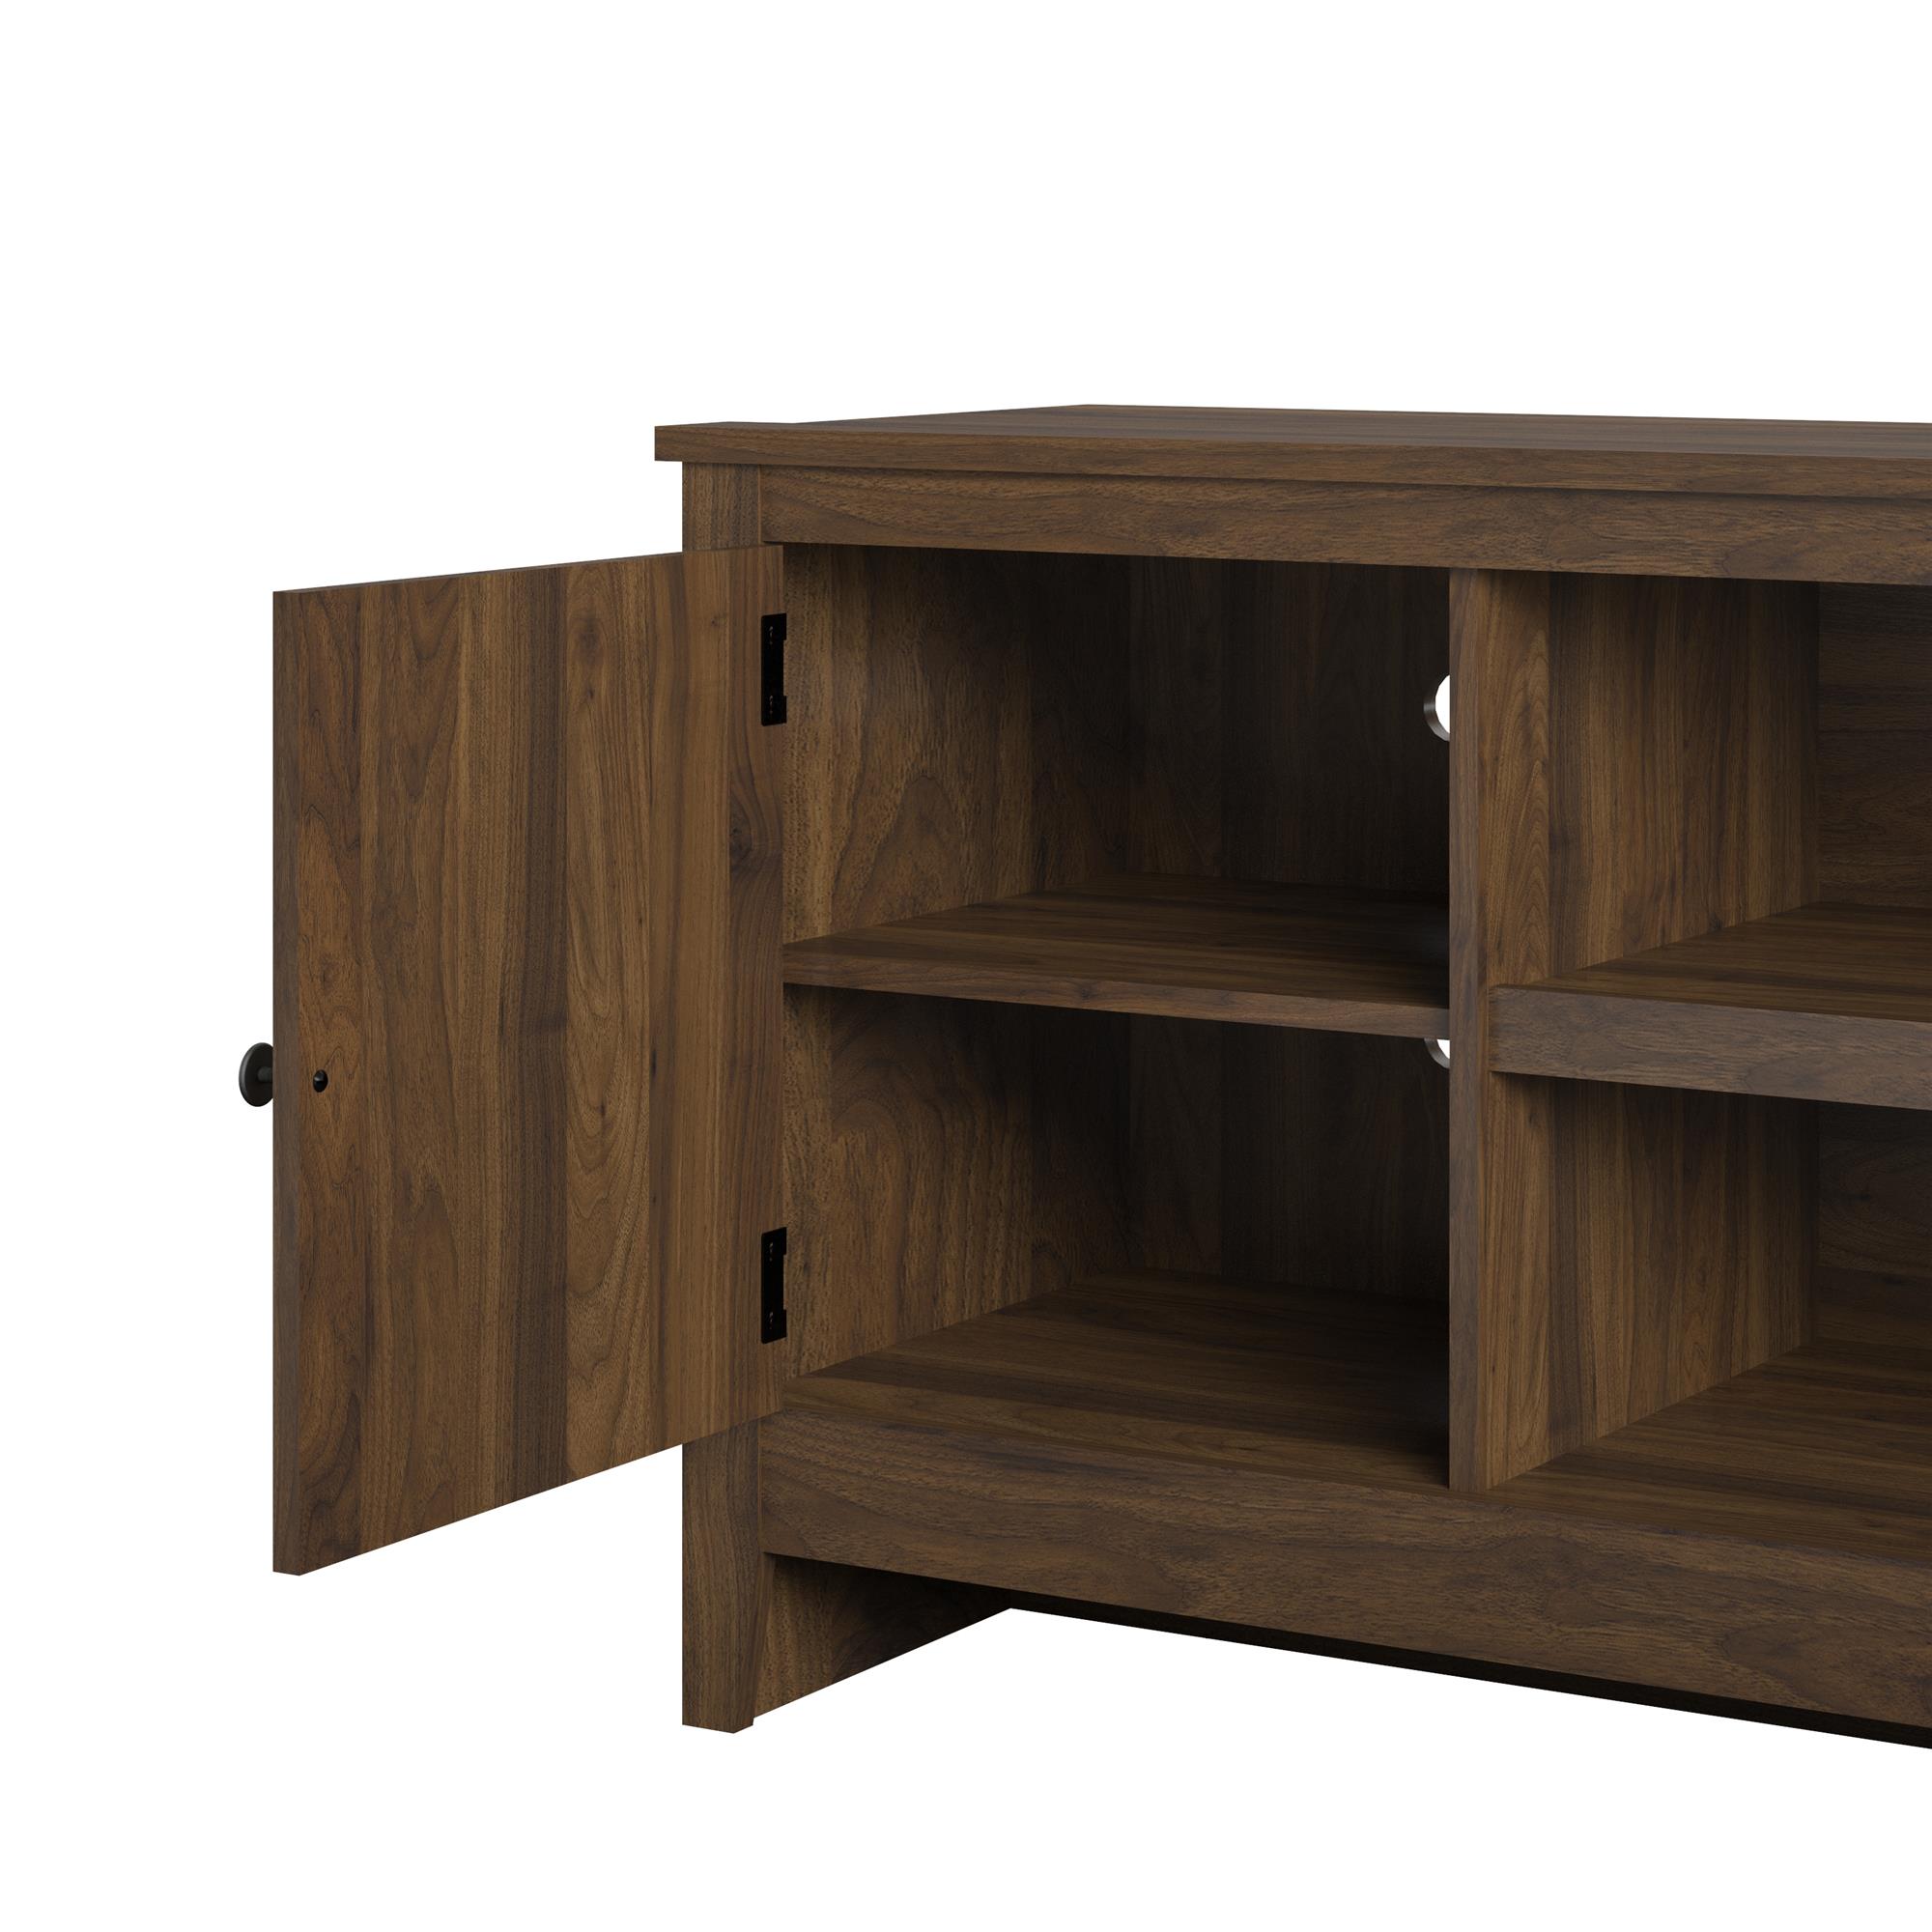 Mainstays TV Stand for TVs up to 65", Walnut - image 5 of 11